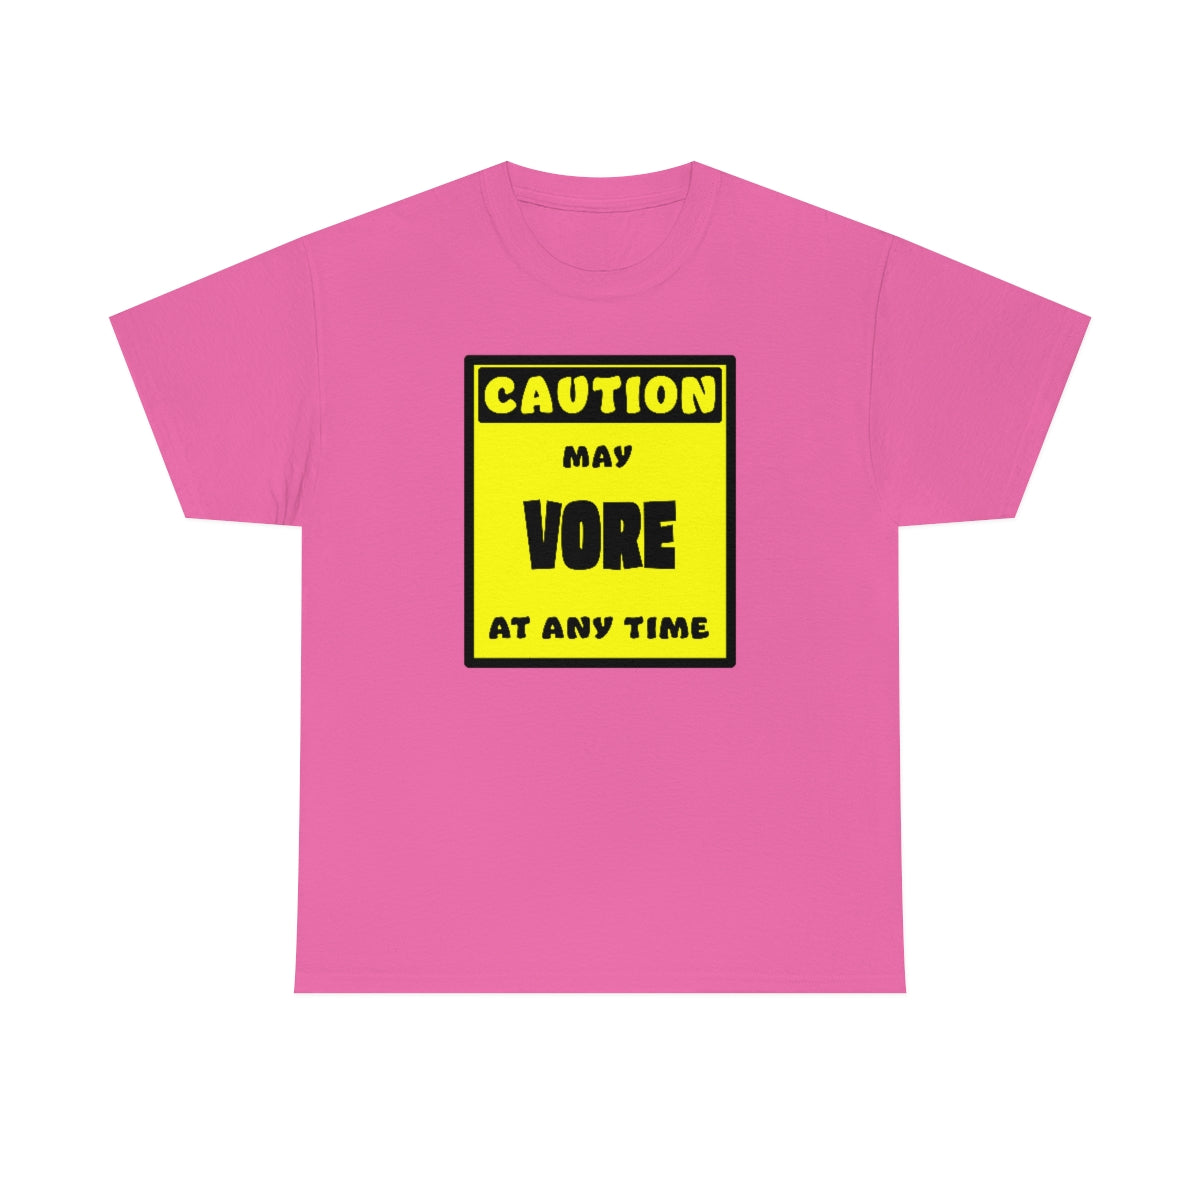 CAUTION! May VORE at any time! - T-Shirt T-Shirt AFLT-Whootorca Pink S 